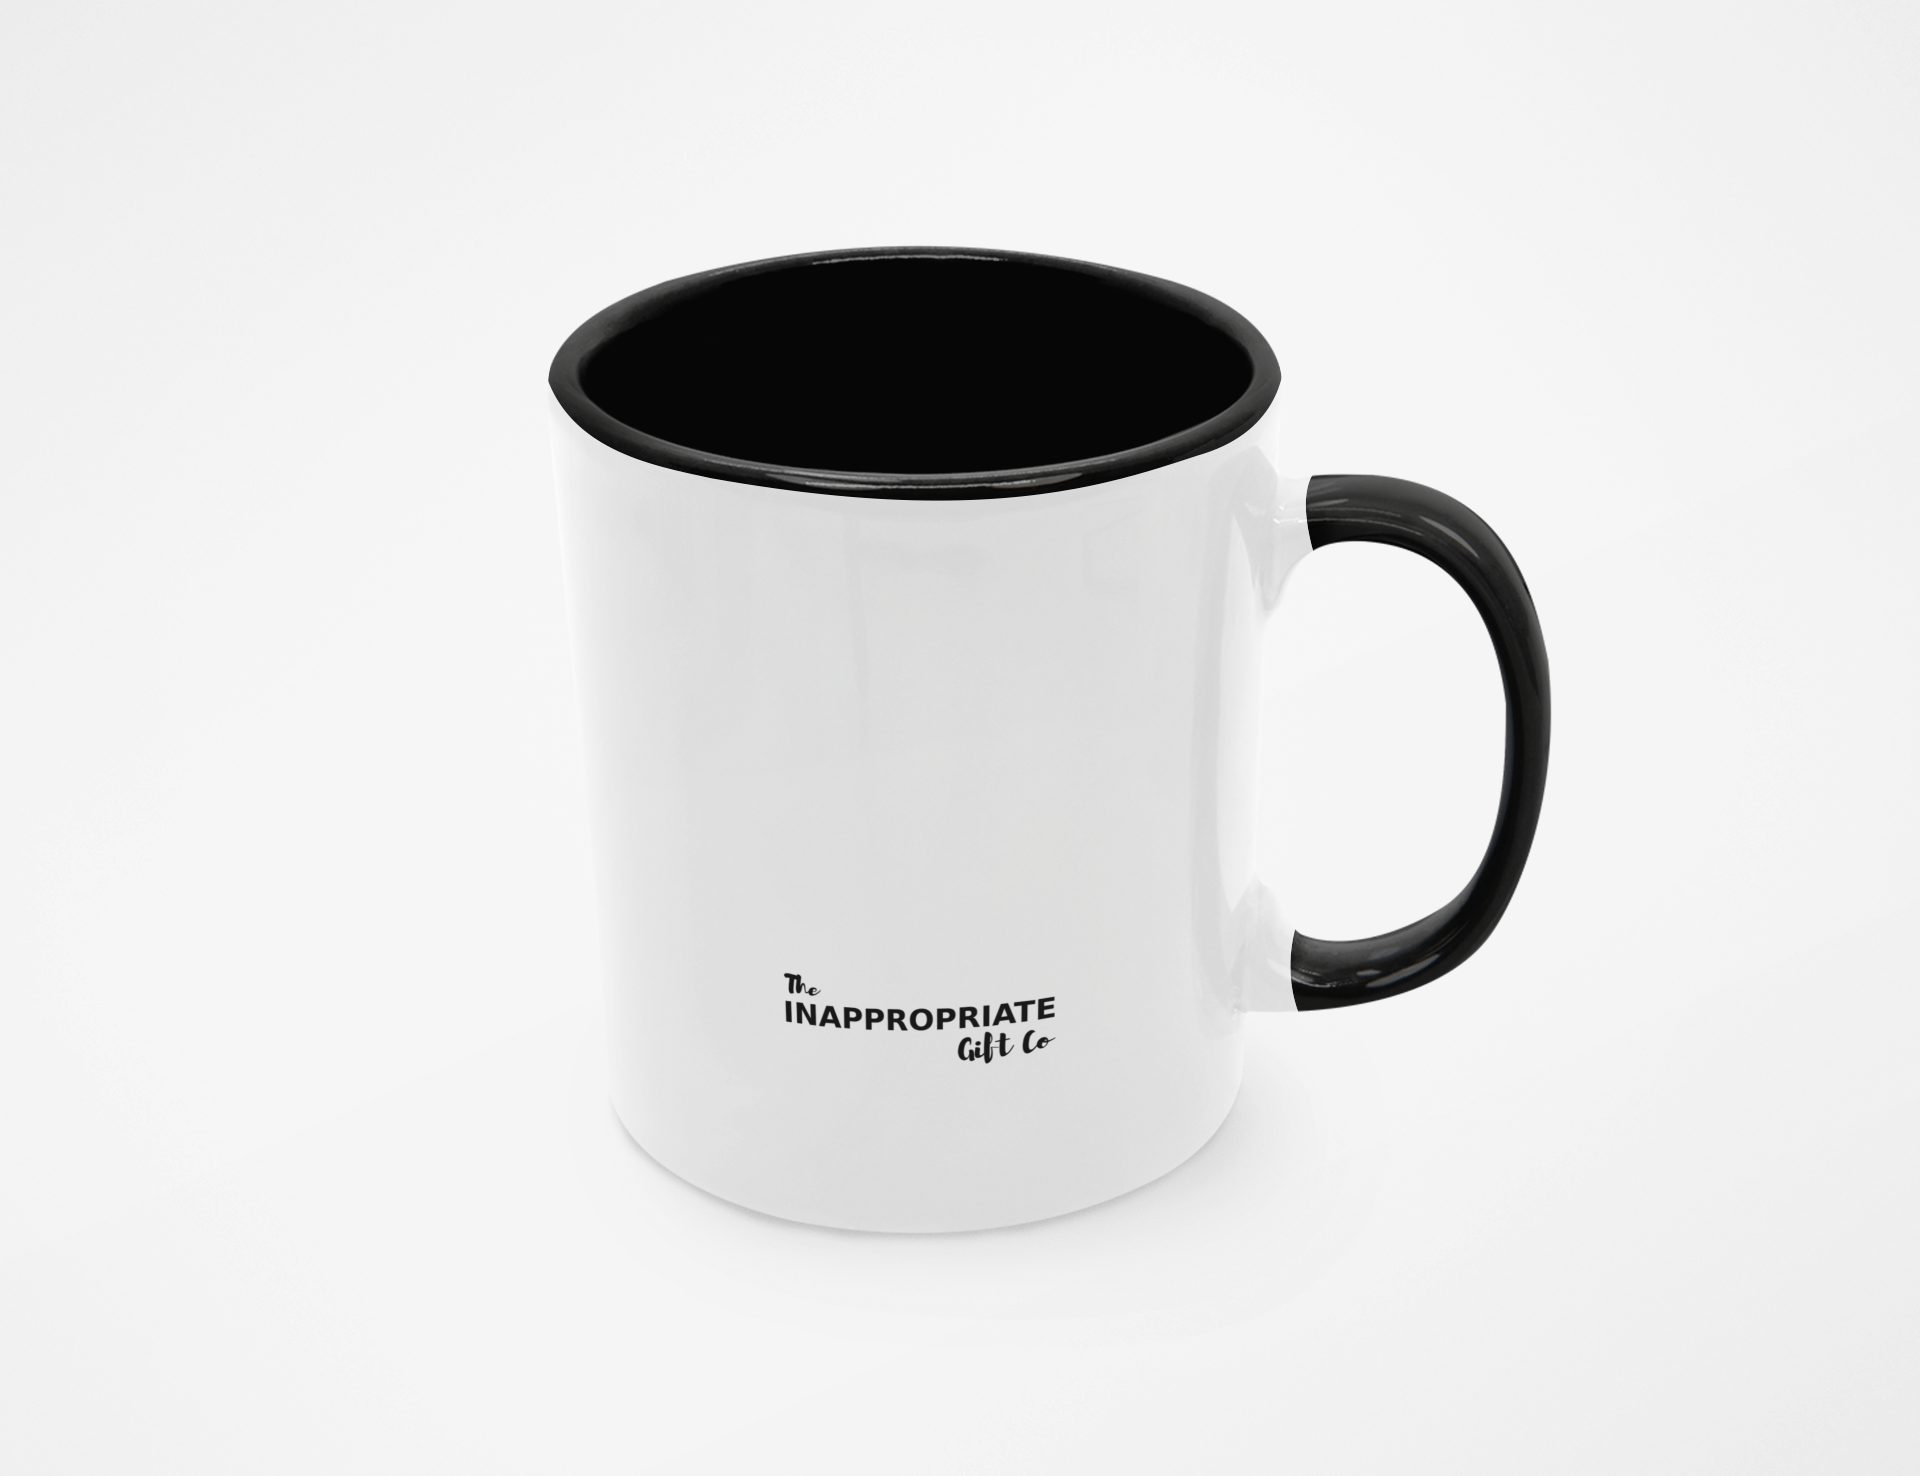 TIGC The Inappropriate Gift Co University of Northern Territory Mug